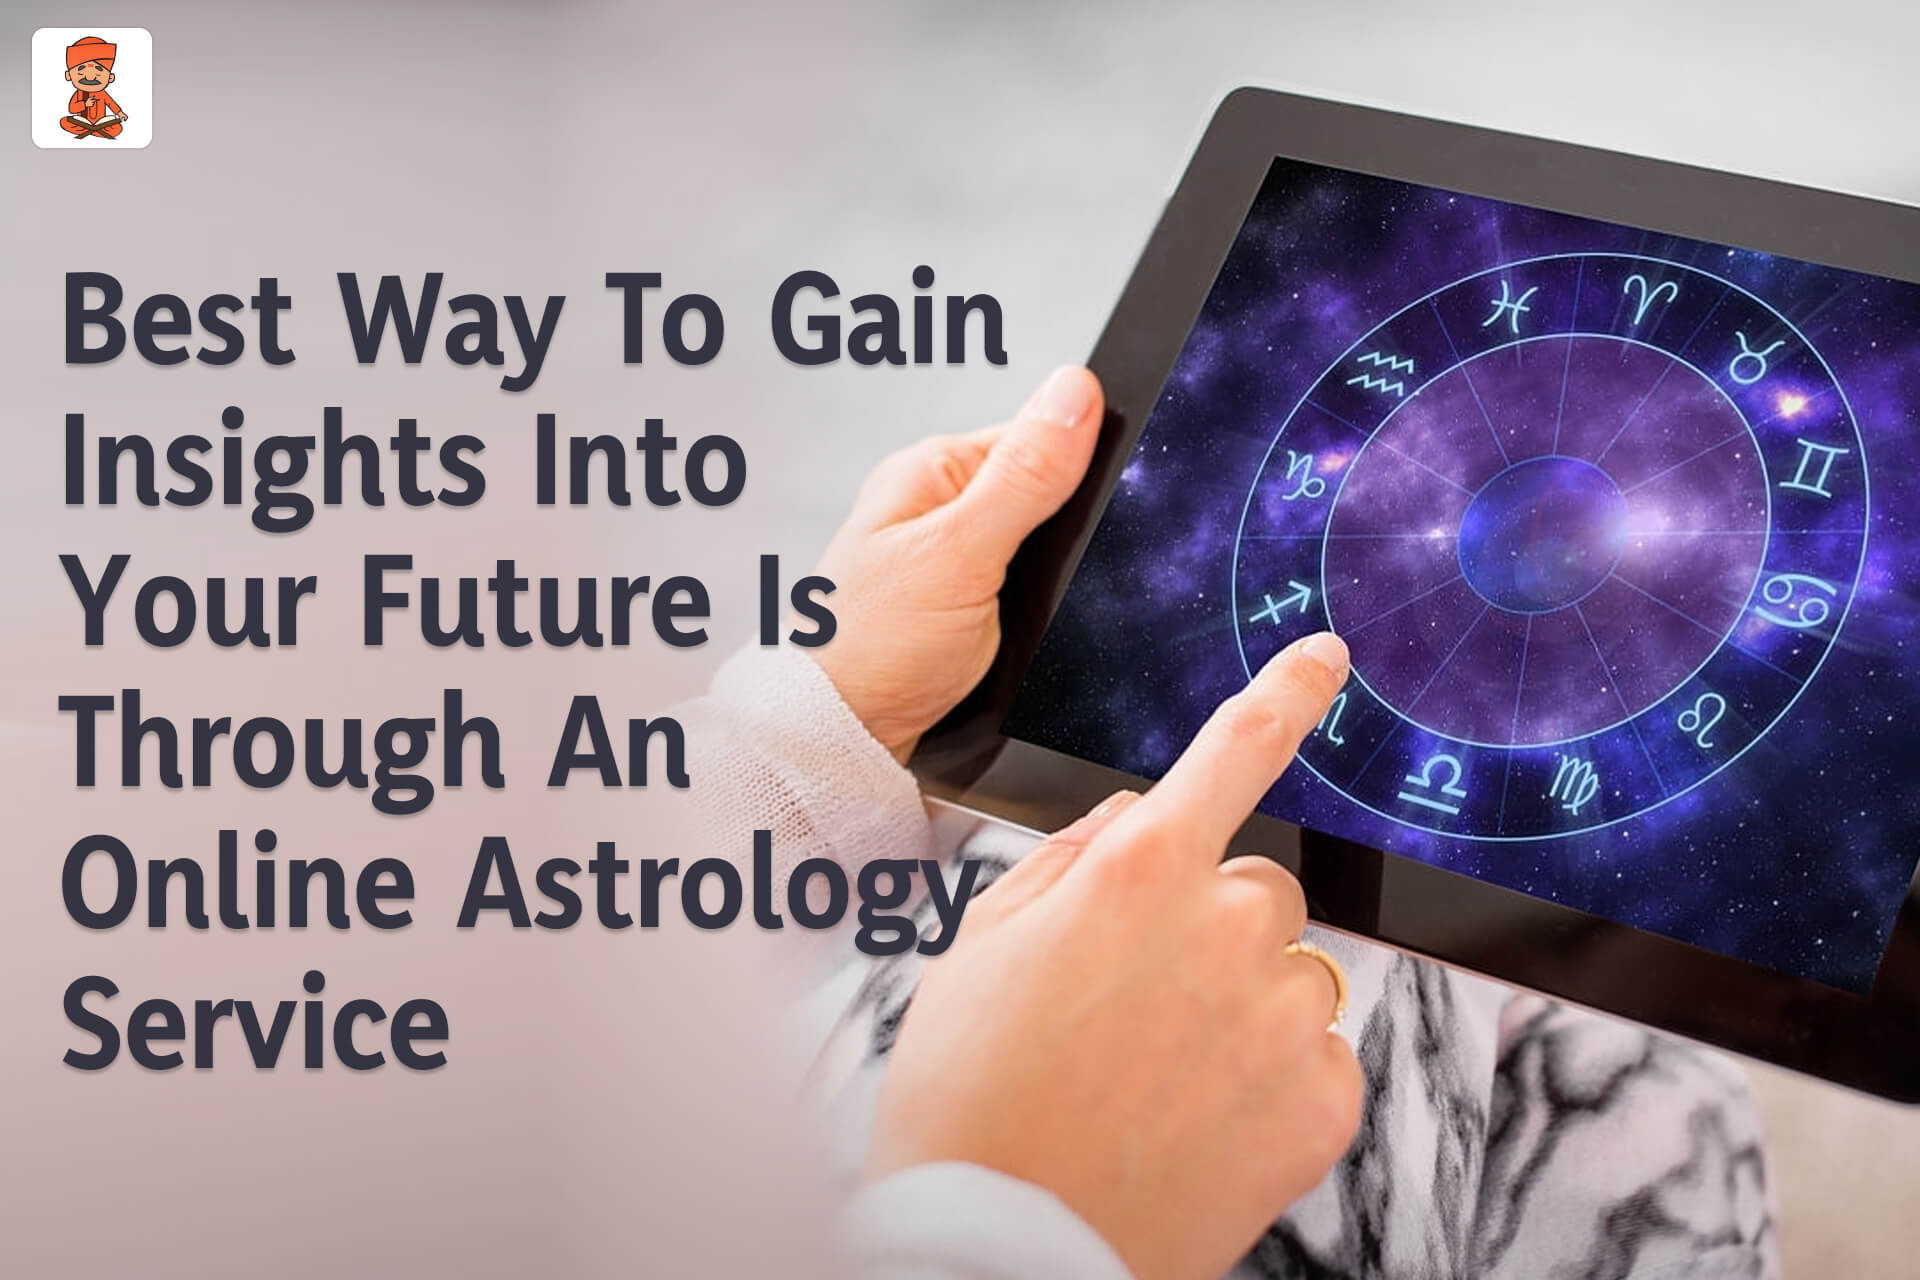 Best Way To Gain Insights For Future Through An Online Astrology Service